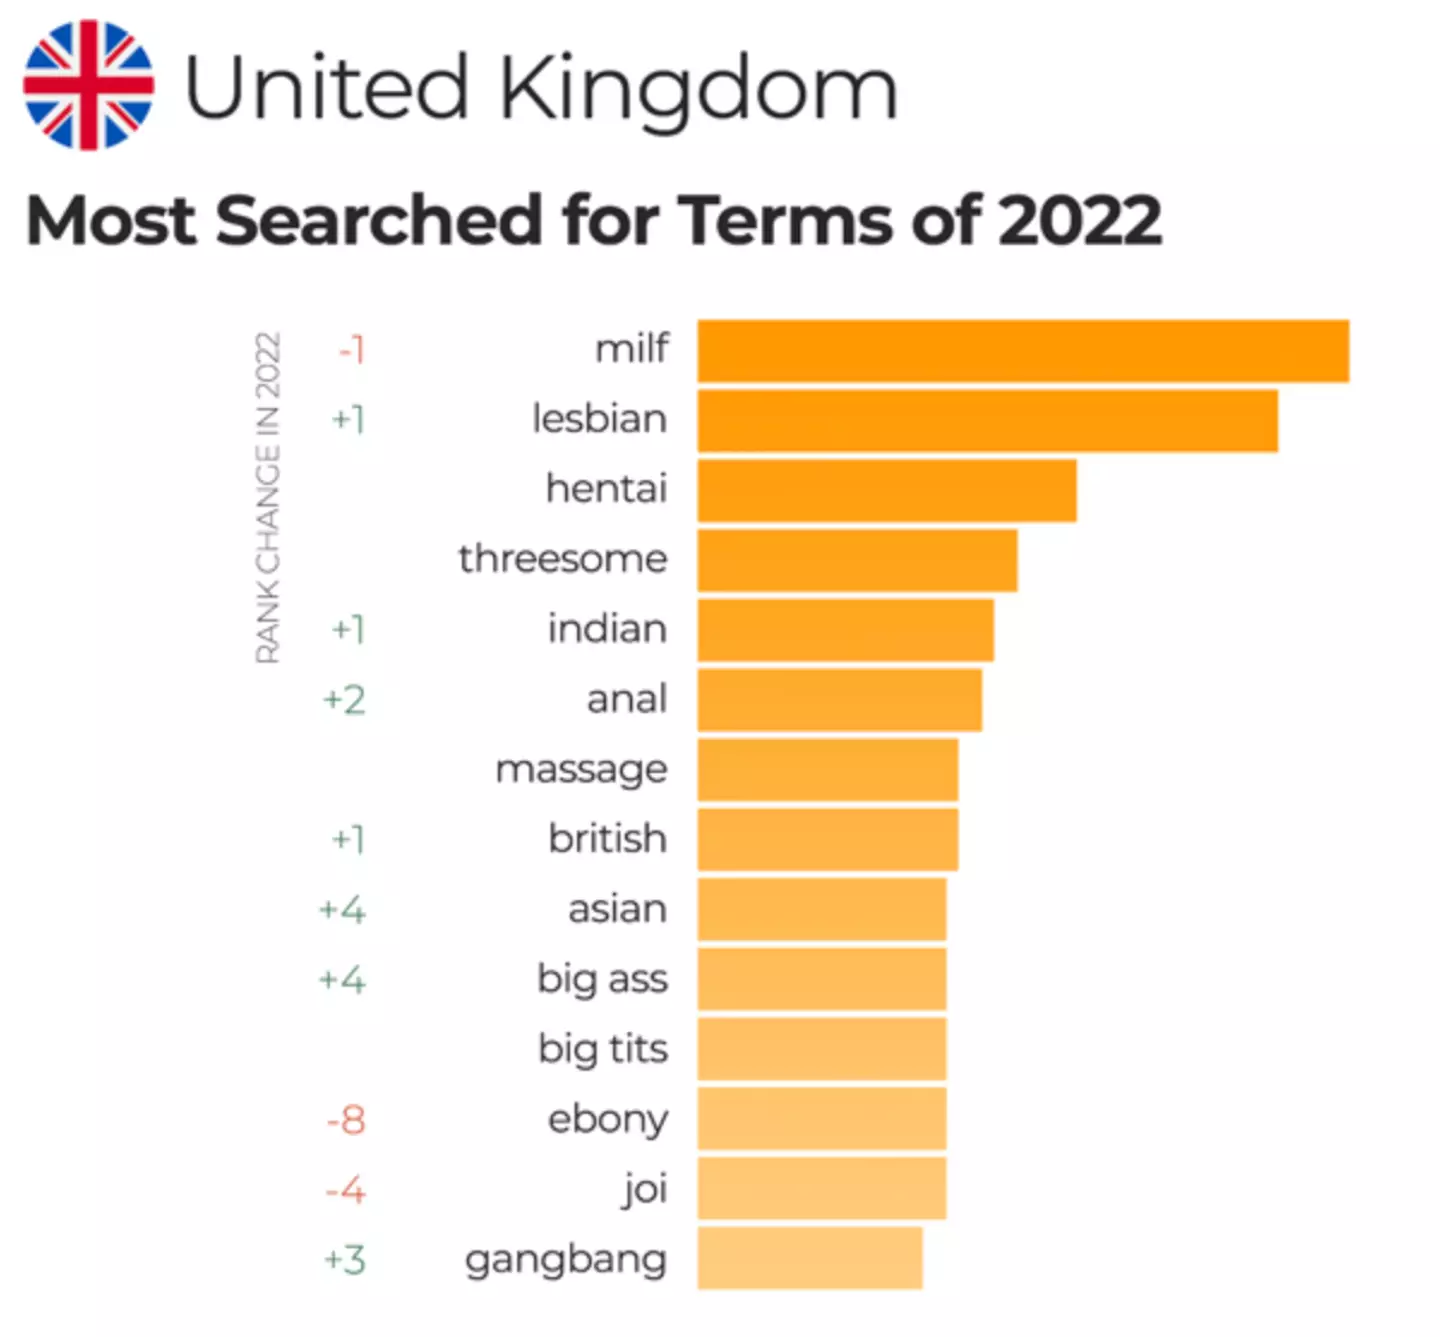 UK's most searched for terms of 2022 PornHub.